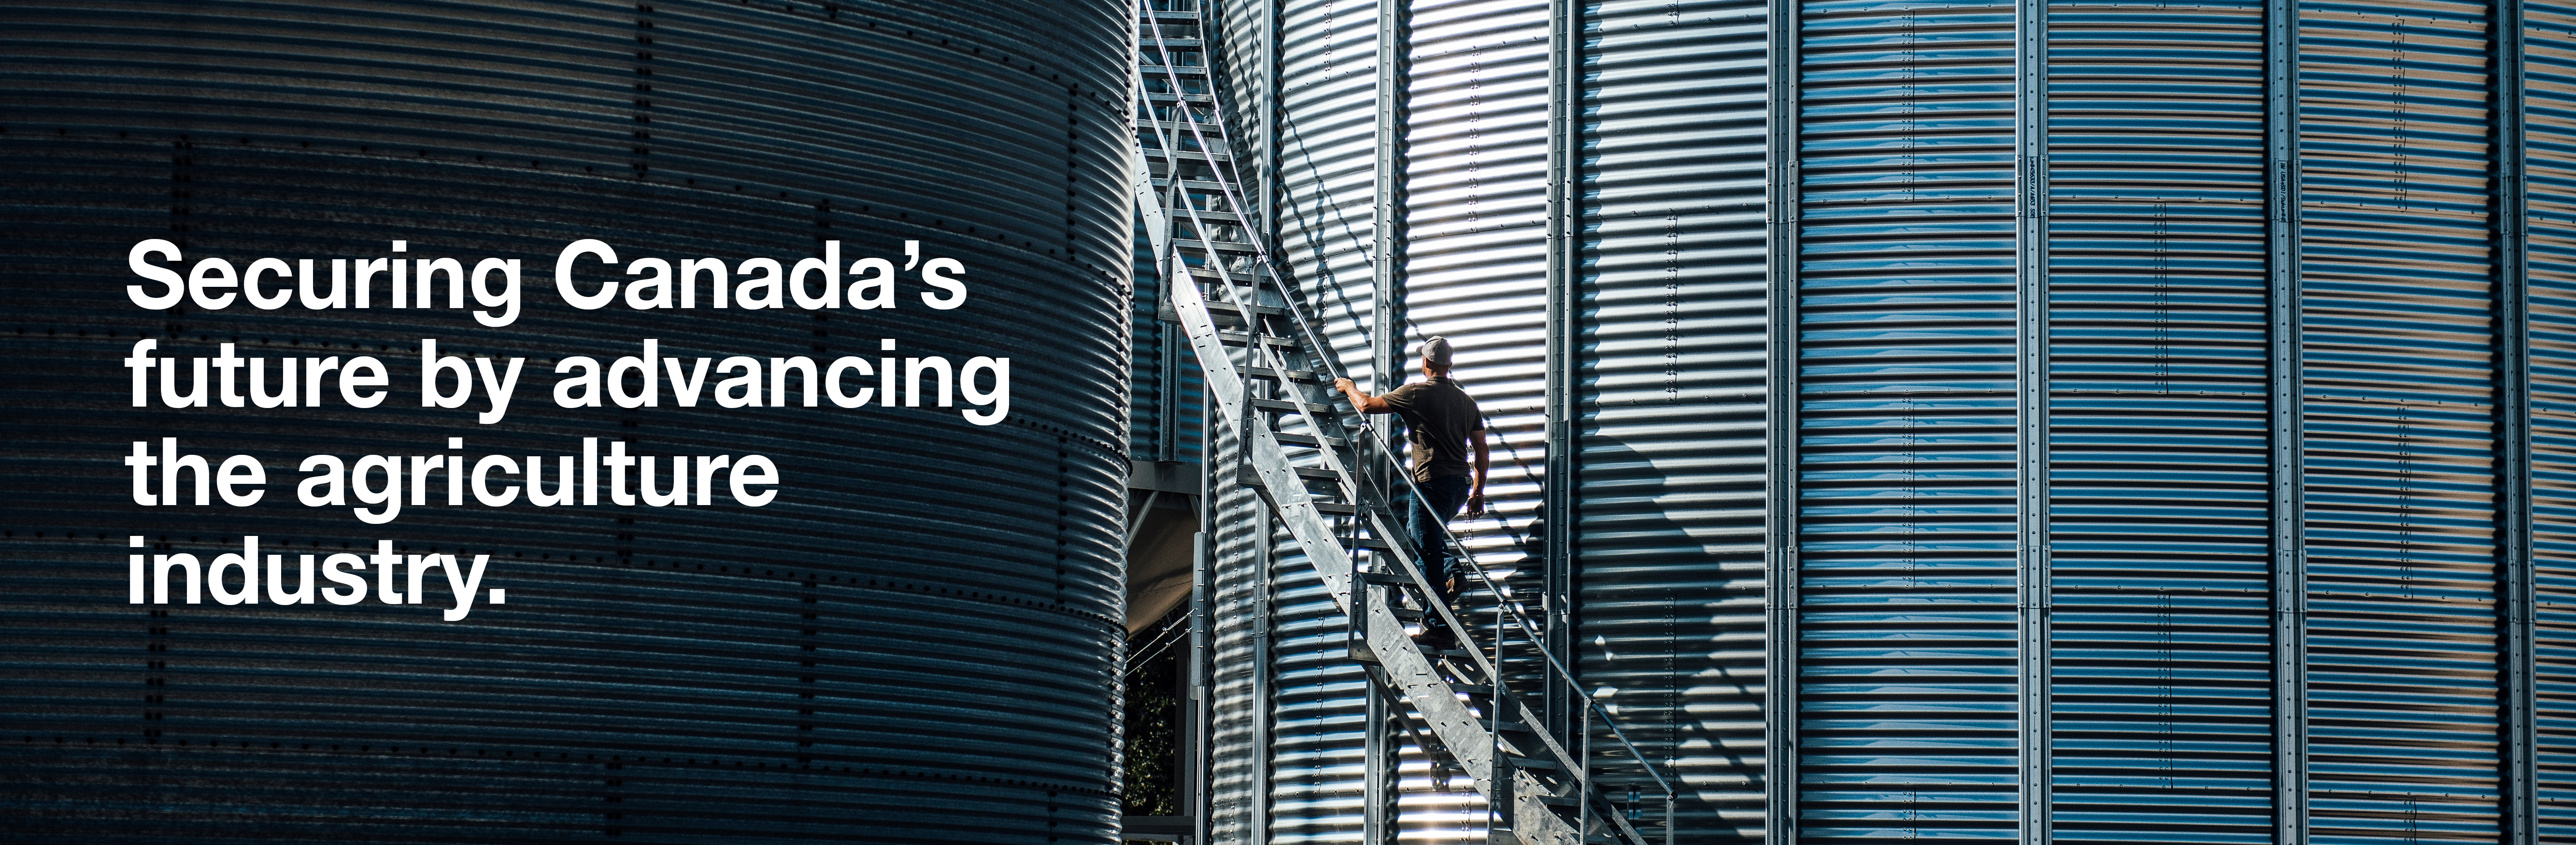 Securing Canada's future by advancing the agriculture industry.